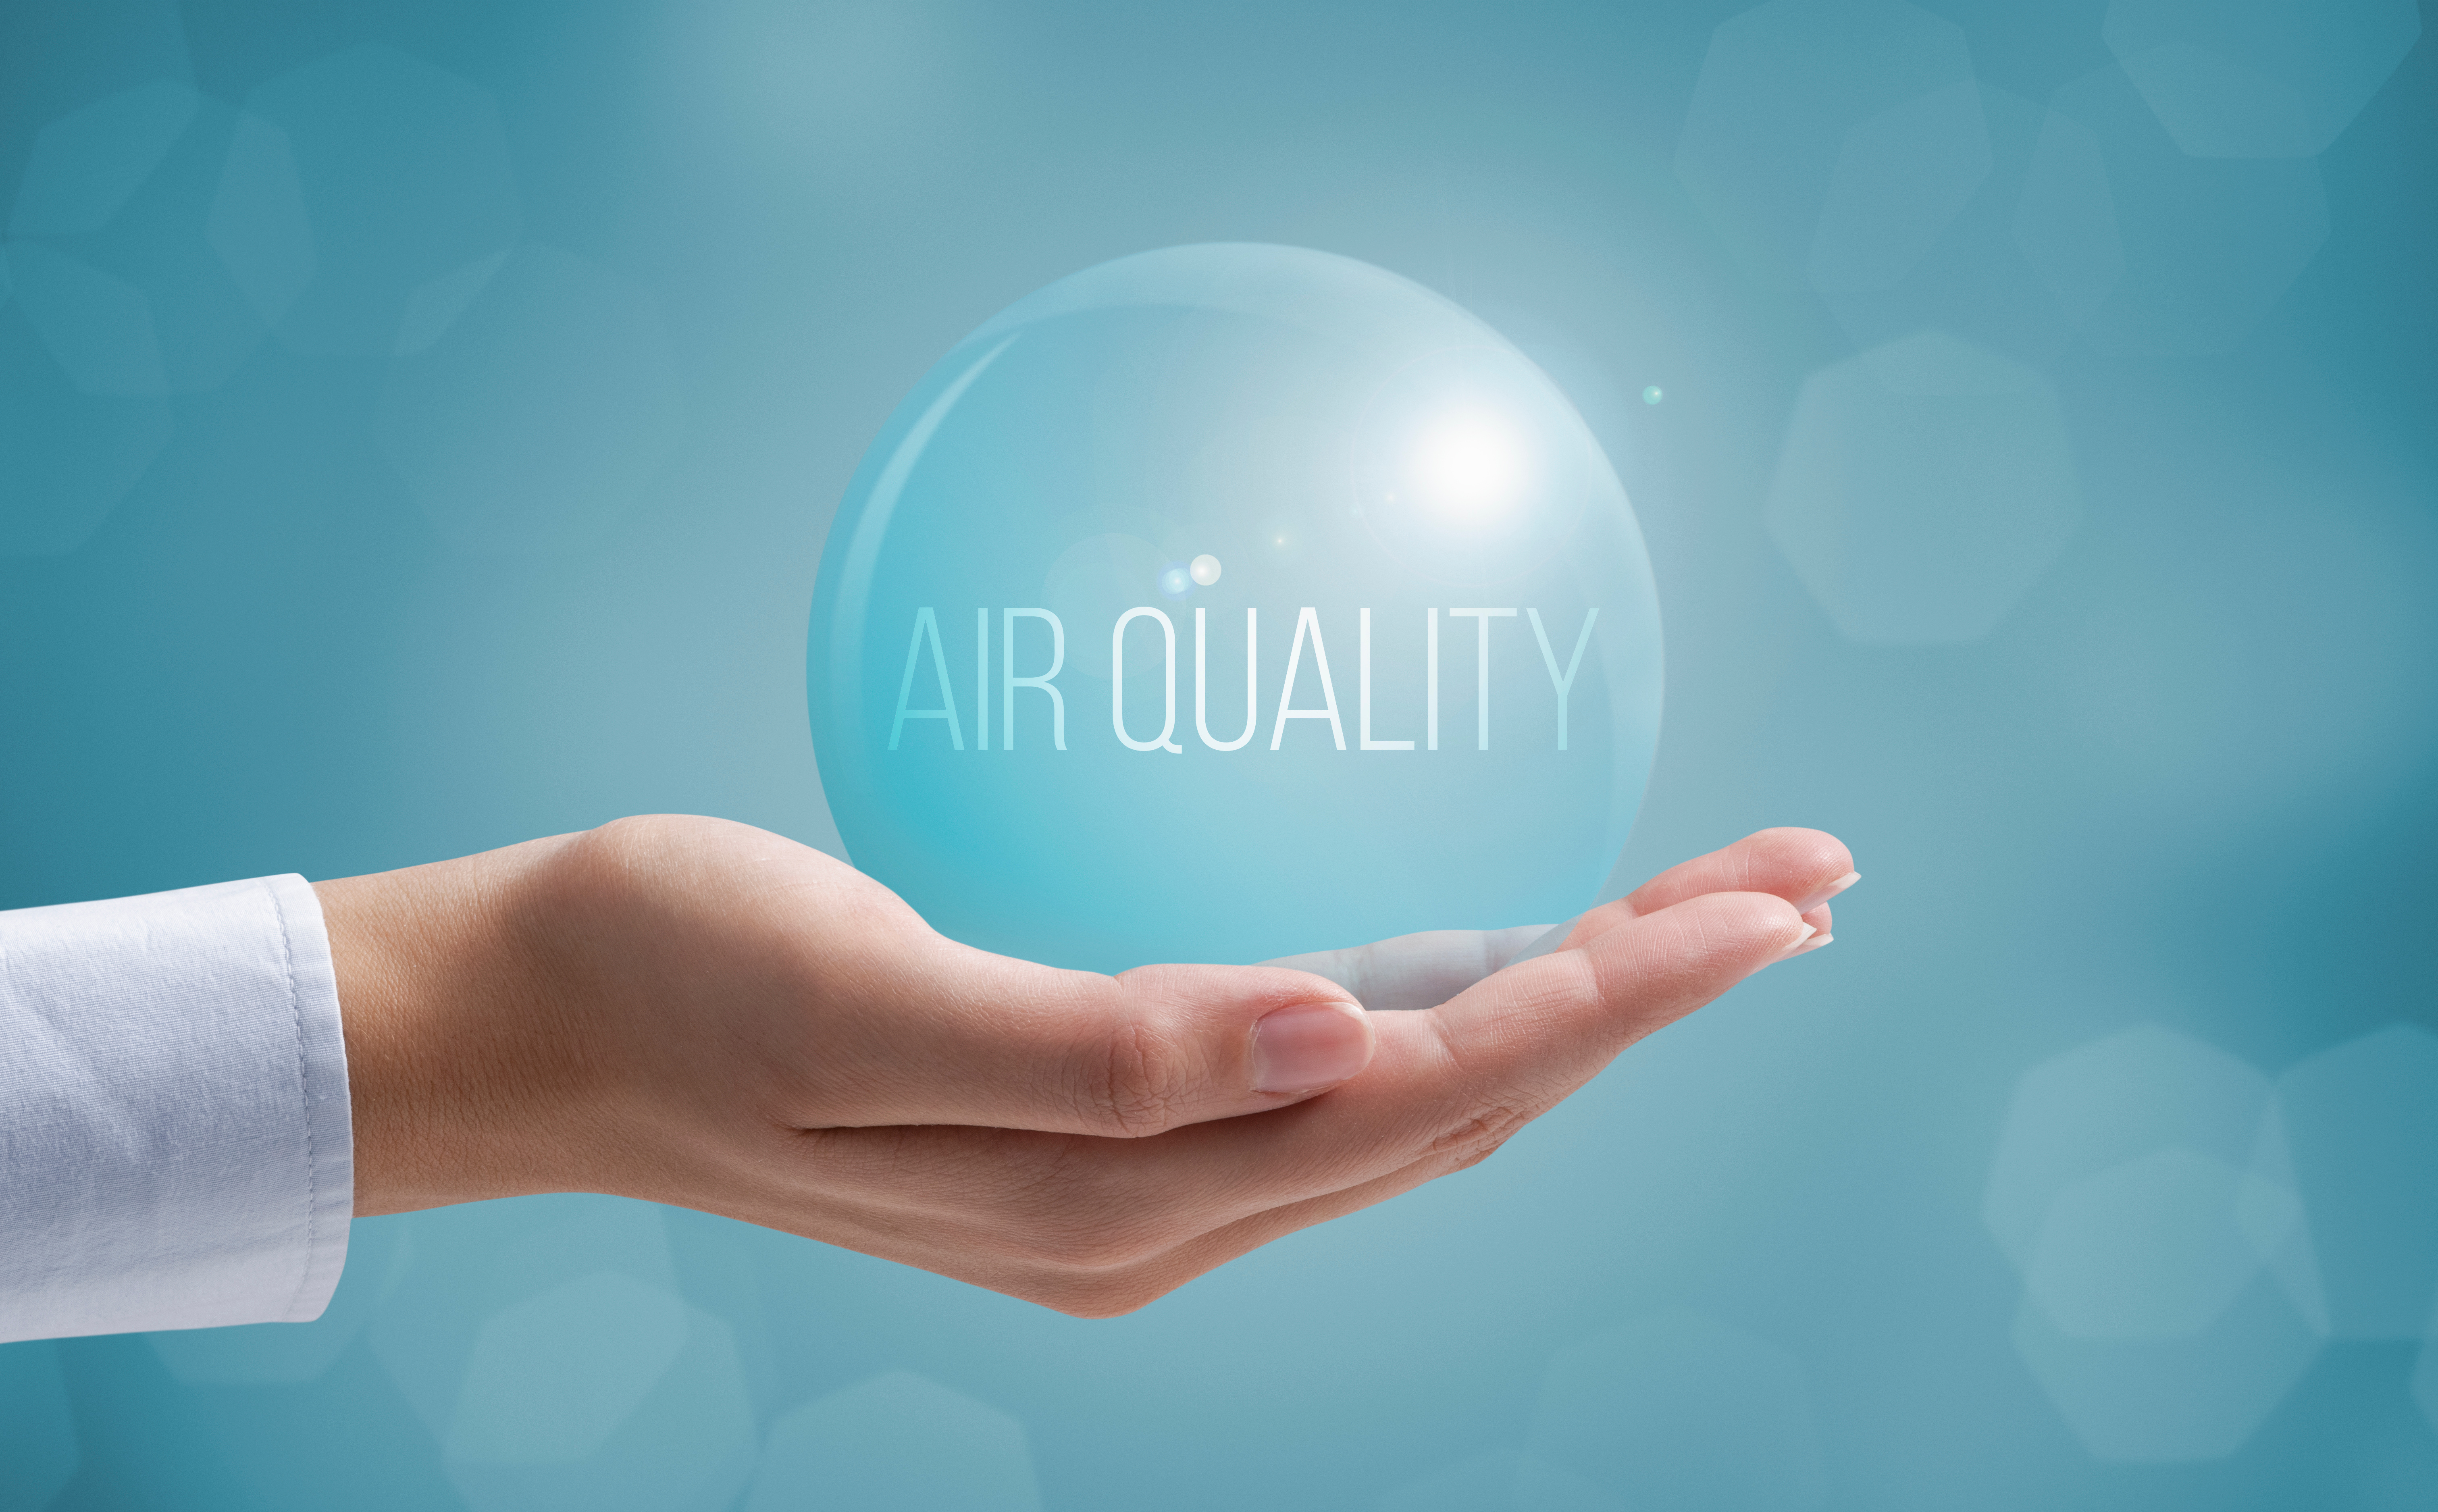 Air-quality- hand with bubble